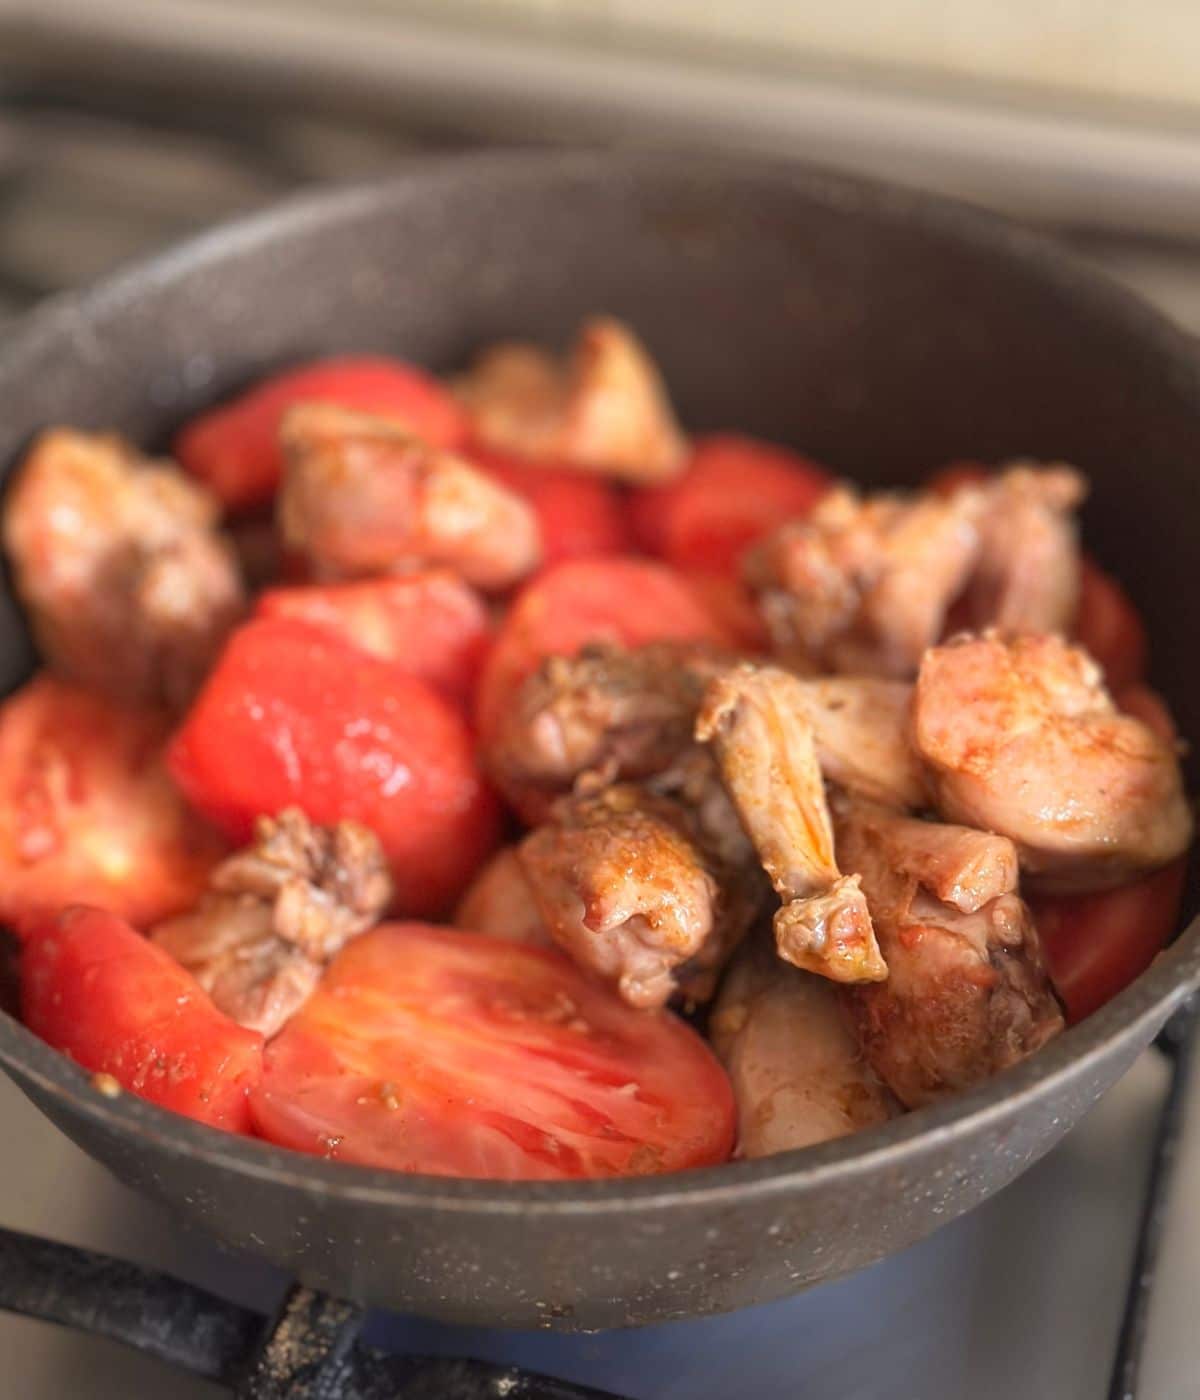 tomatoes added to the chicken